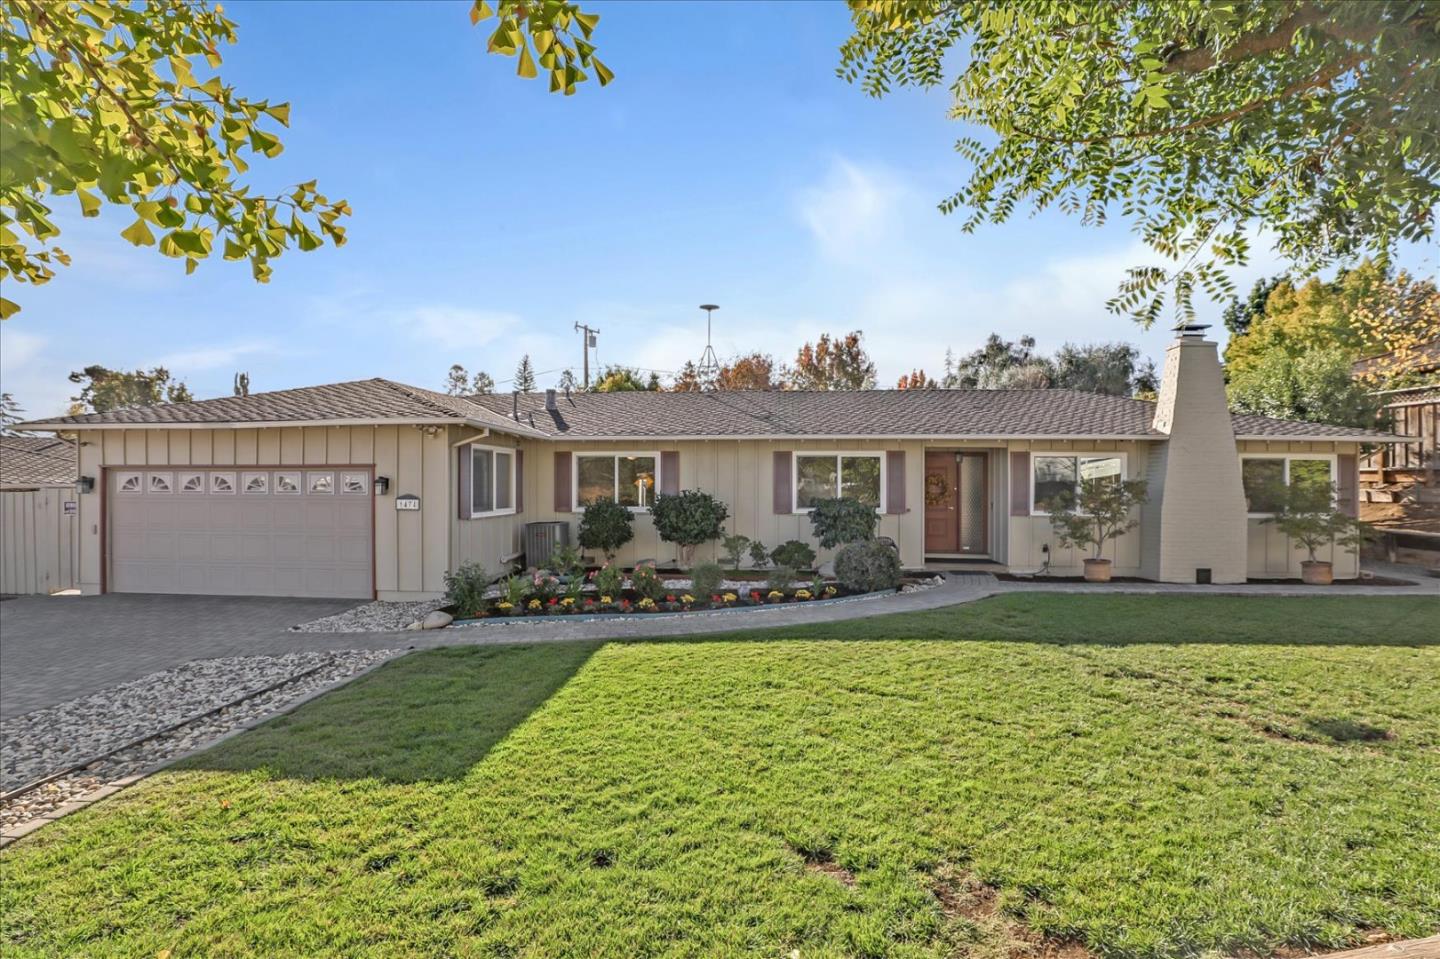 **First Time On The Market Since 1970's!! This charming 4 bed/2 bath, 1,840 SF home on a 11,900 SF Lot is  located in the Highlands neighborhood of Los Altos. Ideal for your active life style with easy access to shopping ctr and freeway. Are you looking for tranquil serenity? No worries, The patio is the perfect place to get away from the cares of the day and relax, enjoy quality family time lounging around and swimming in its beautiful pool or there are plenty of room to start your own vegi garden. This Home offers Attic Fan which cools down the whole house in mins in addition to Central AC and Ceiling Fans, hardwood flooring throughout, New plush carpet in Family room, Fresh Interior Painting, Kitchen with a sky light and island. This home features a separate formal dining room for more elaborate occasions and a breakfast nook with abundant natural light for your casual dining needs. Close to Rancho San Antonio Preserve, Foothill Crossing Shopping Ctr. This is a MUST SEE!!